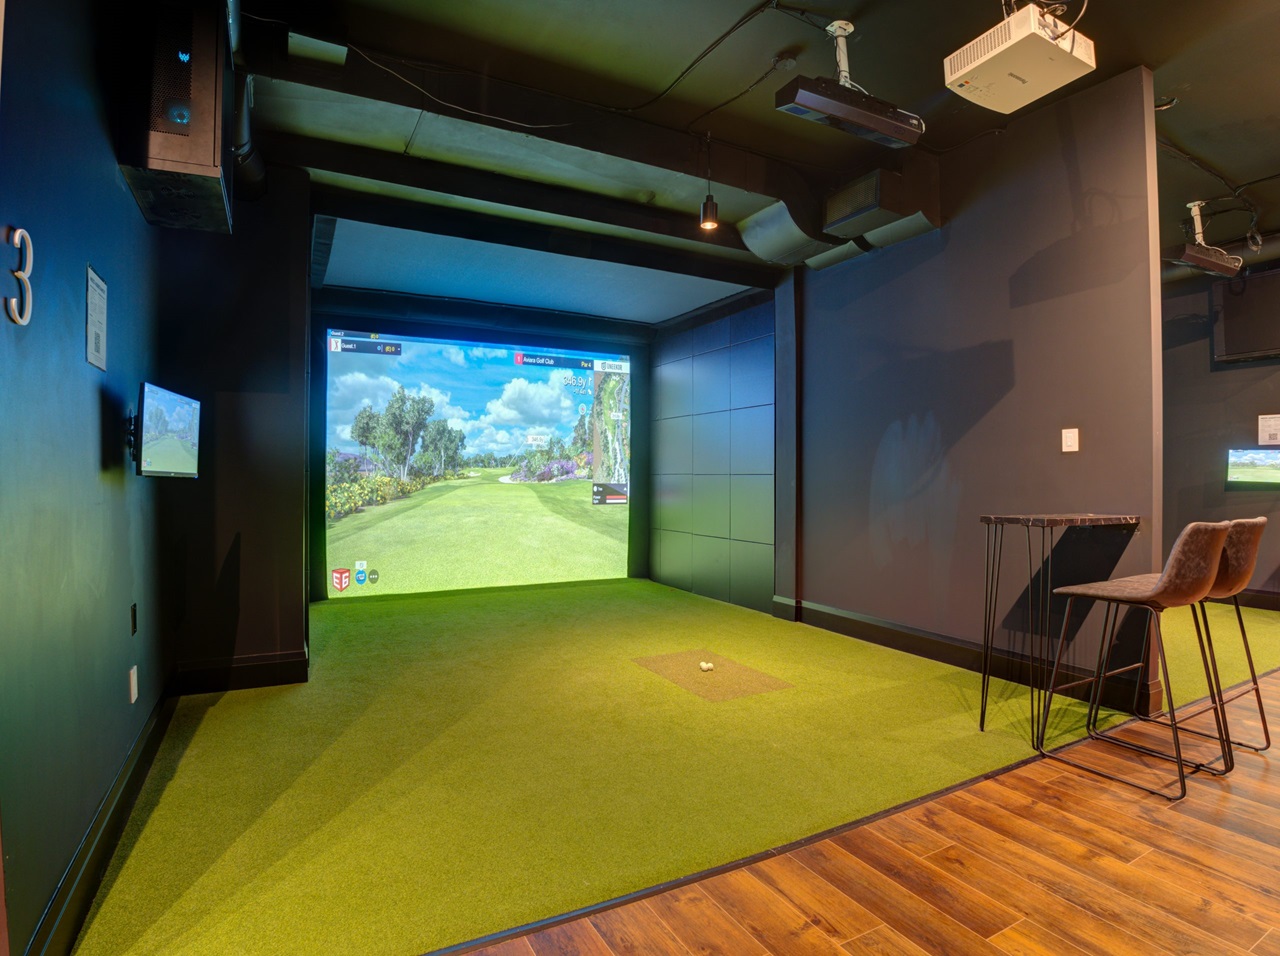 New 24/7 golf simulator and sports bar now open in Brampton